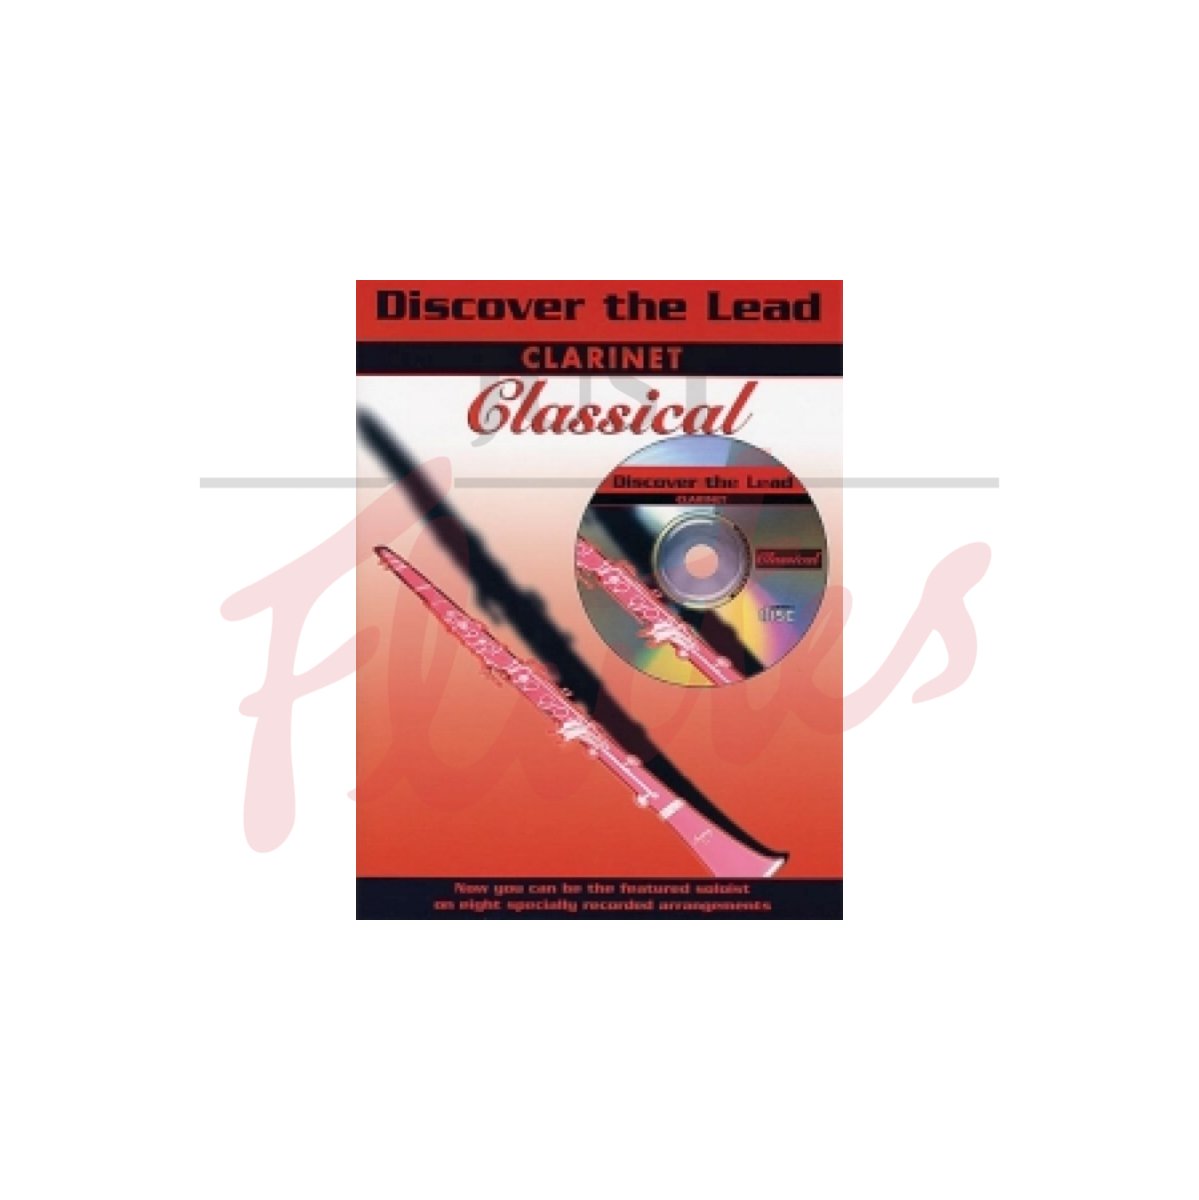 Discover the Lead: Classical [Clarinet]